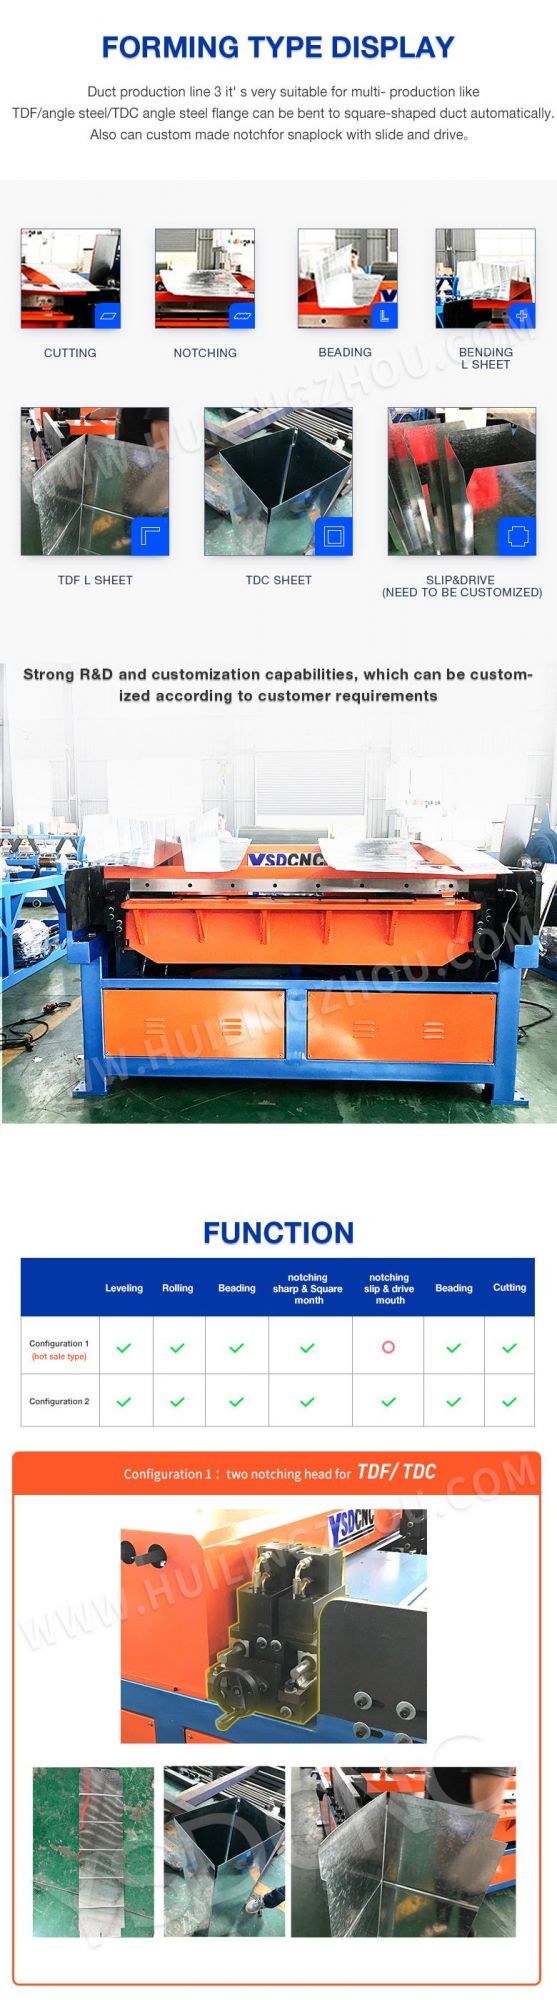 Ysdcnc Brand Rectangular Duct Production Line, HVAC Air Tube Forming Machine, Auto Duct Line 3